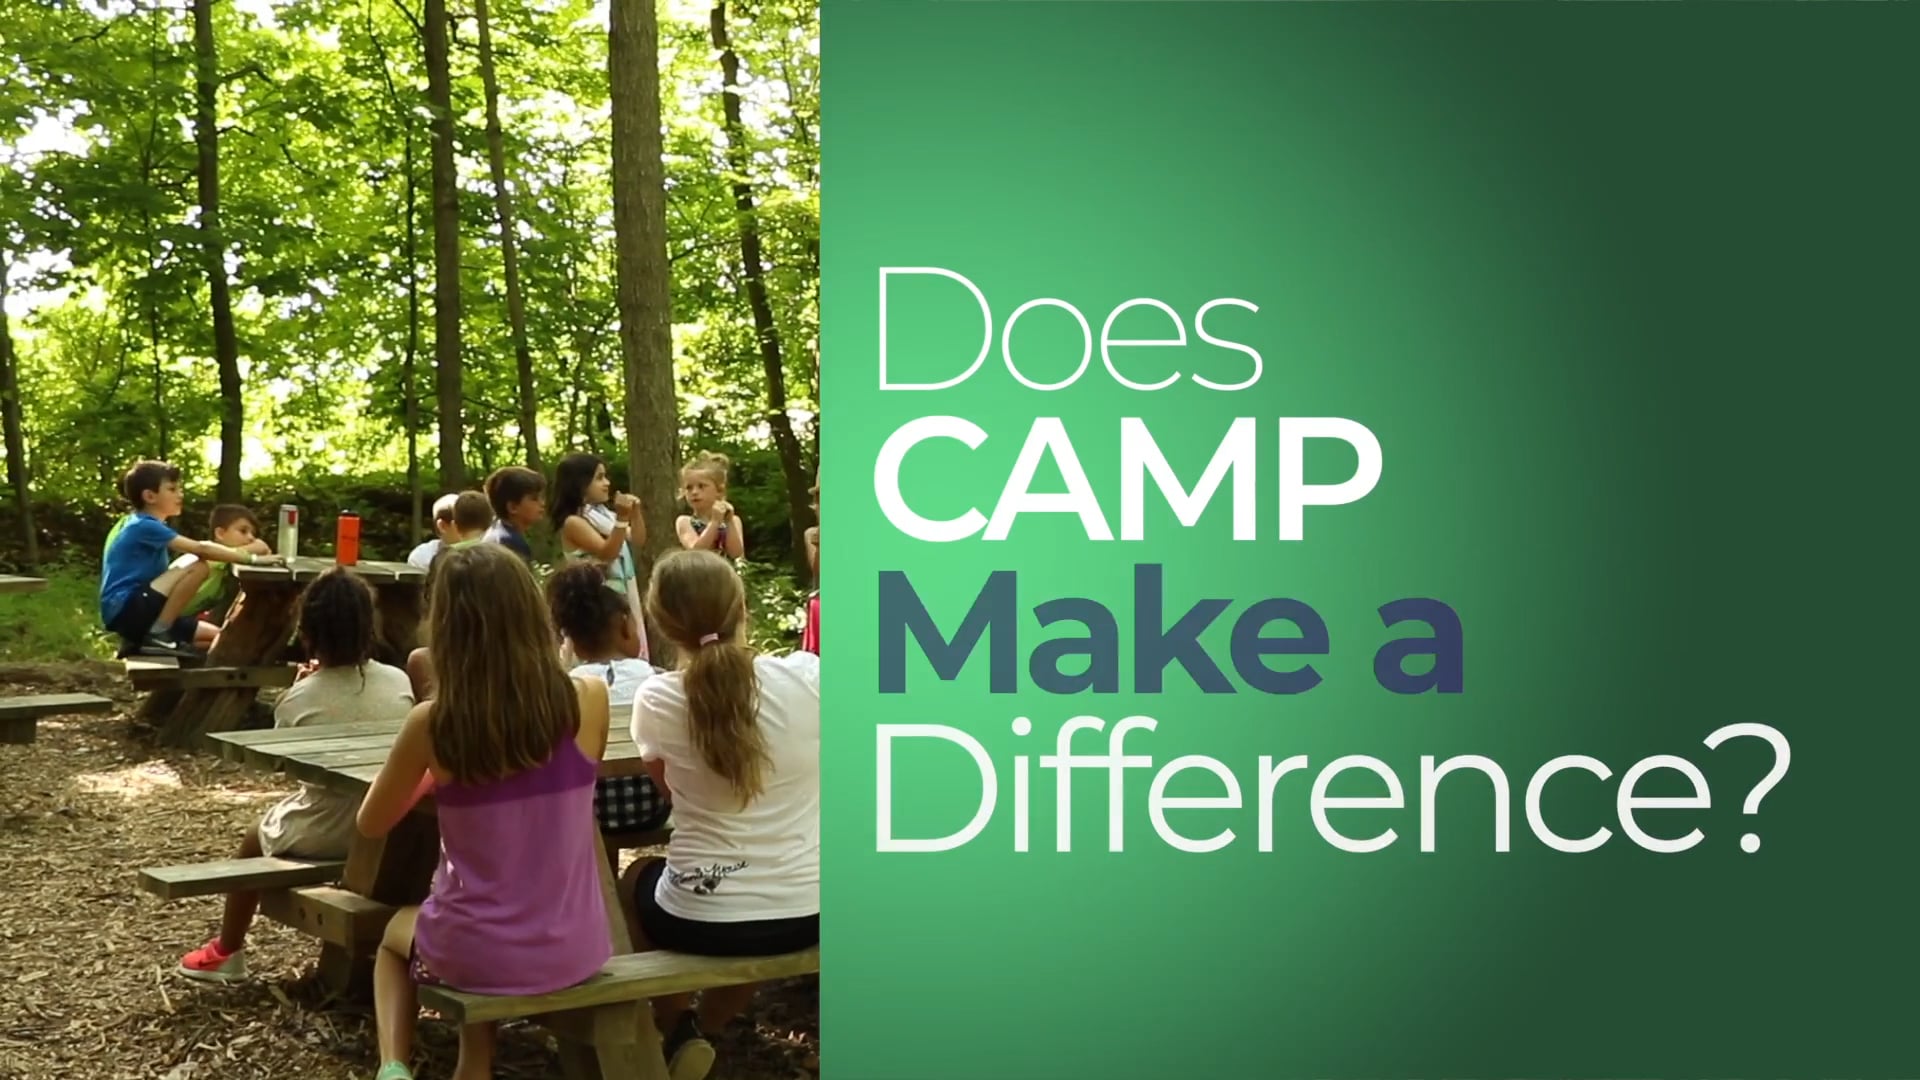 Relationship Skills - The Impact of Camp